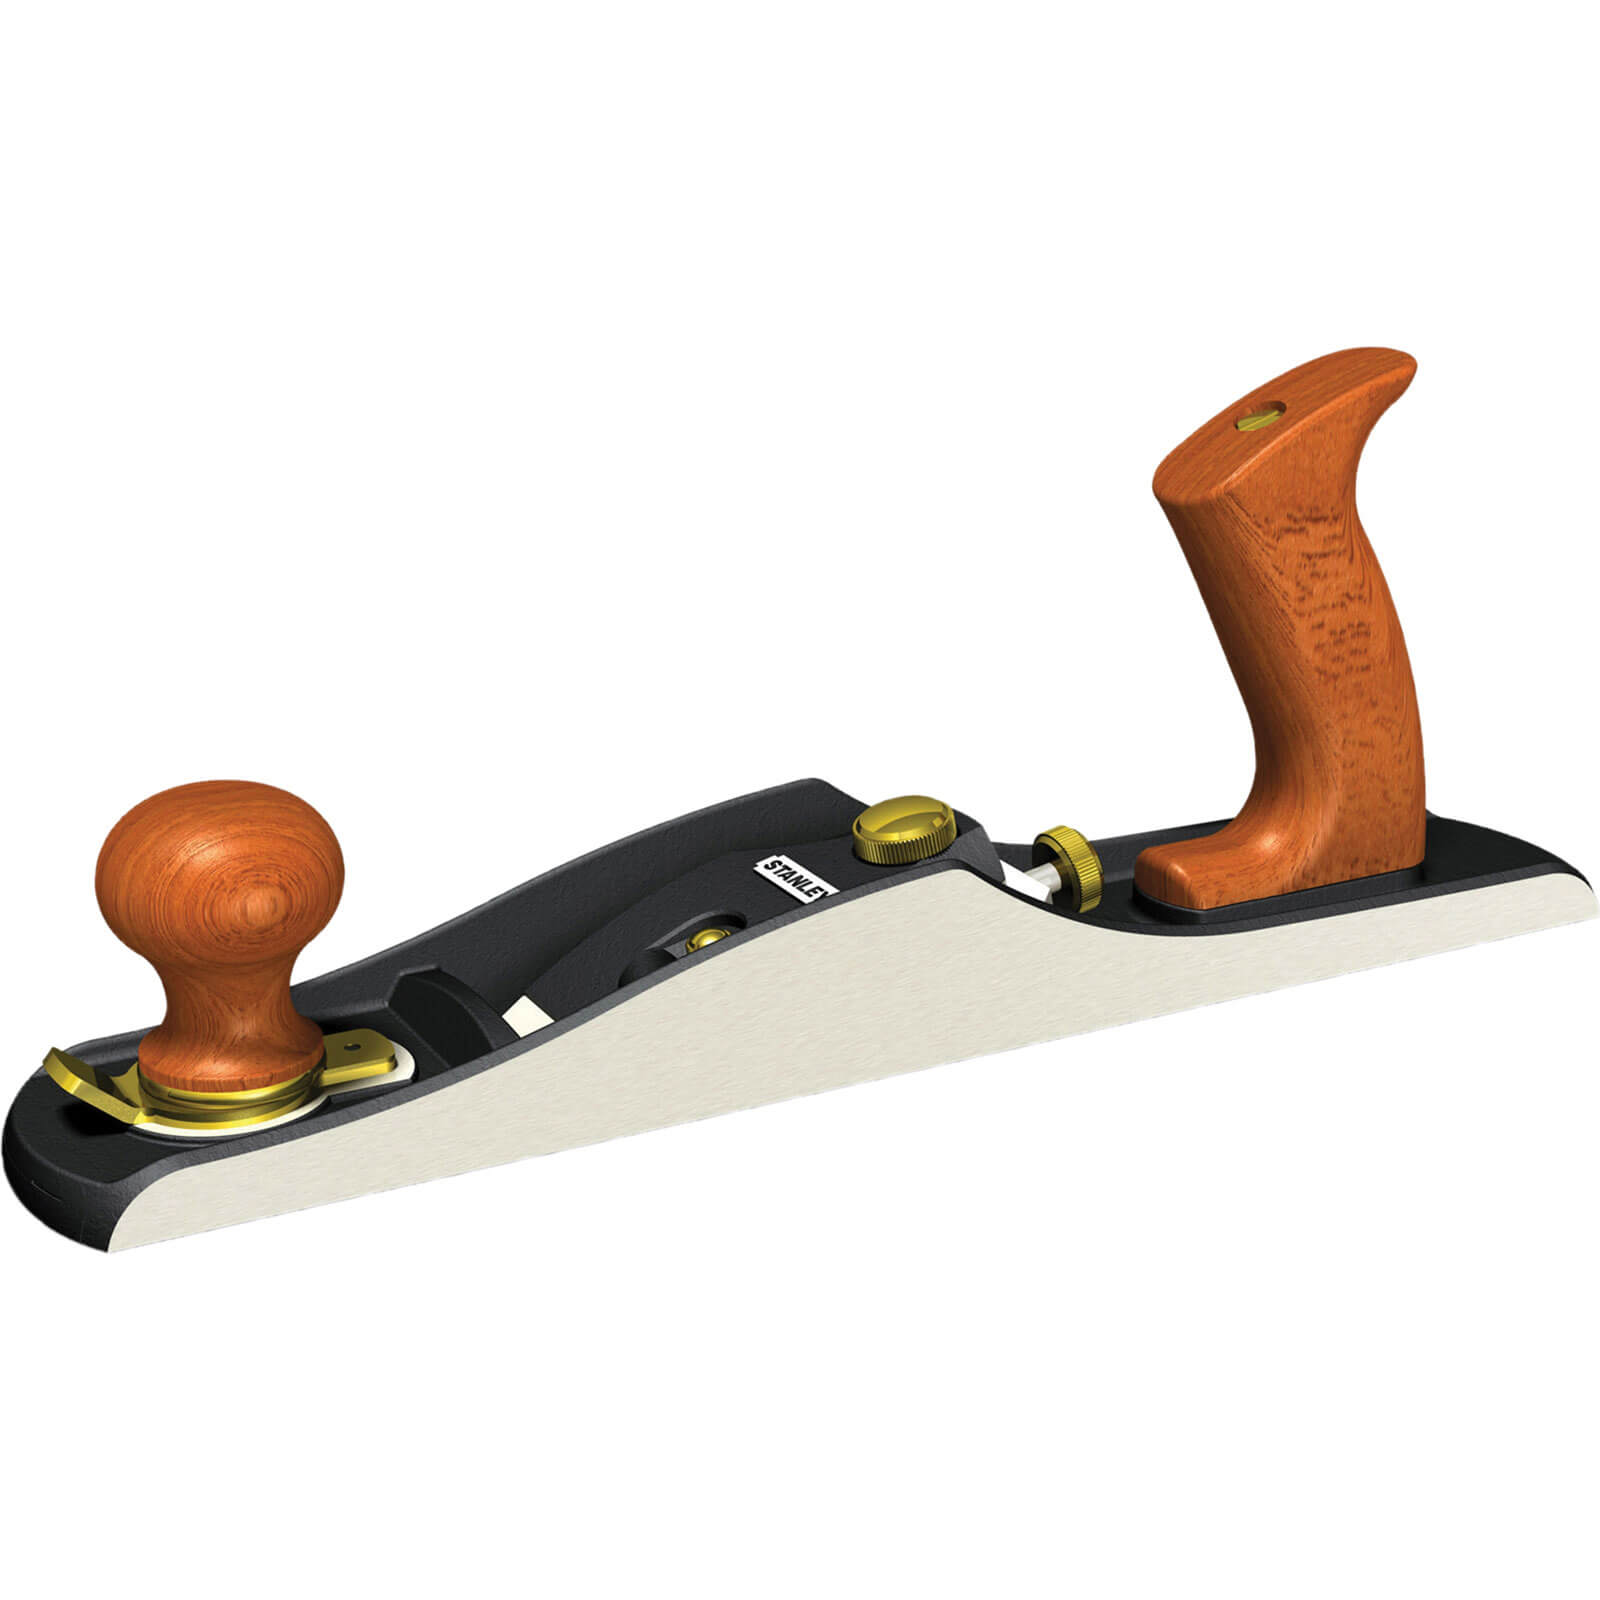 Image of Stanley Sweetheart No 62 Low Angle Jack Plane